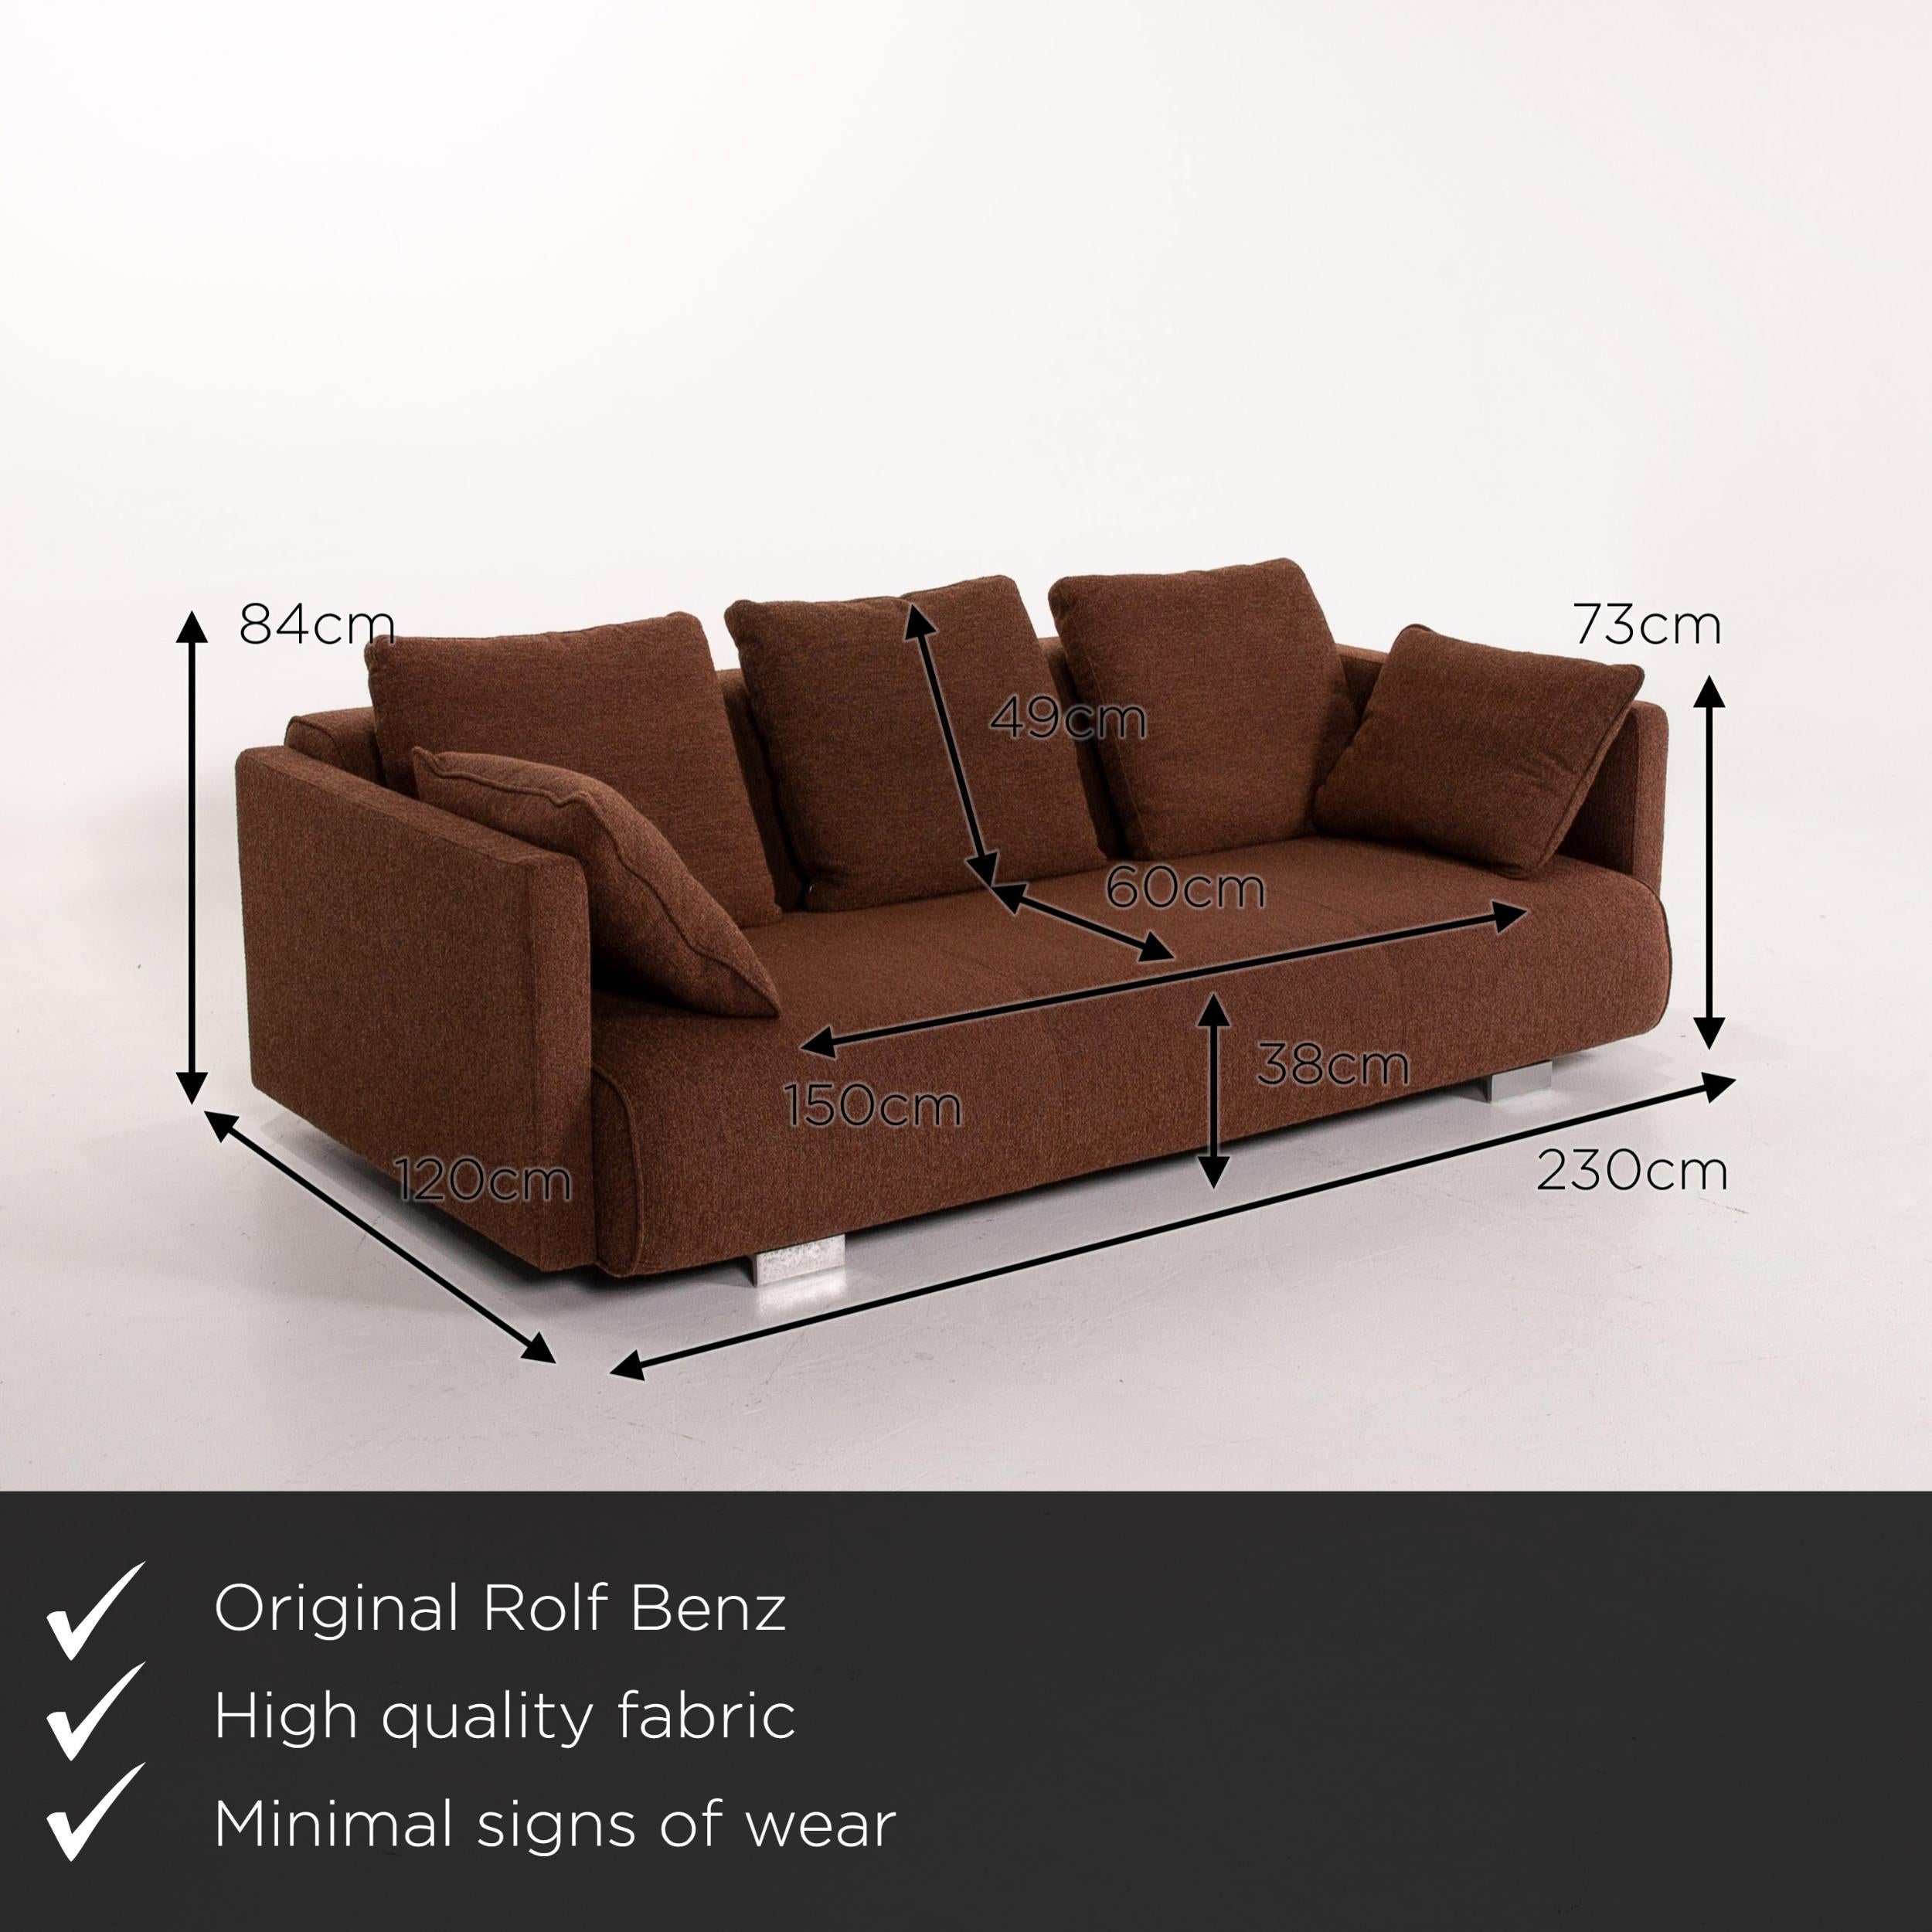 We present to you a Rolf Benz 6300 fabric sofa brown three-seat couch.

Product measurements in centimeters:

Depth 120
Width 230
Height 84
Seat height 38
Rest height 73
Seat depth 60
Seat width 150
Back height 49.



   